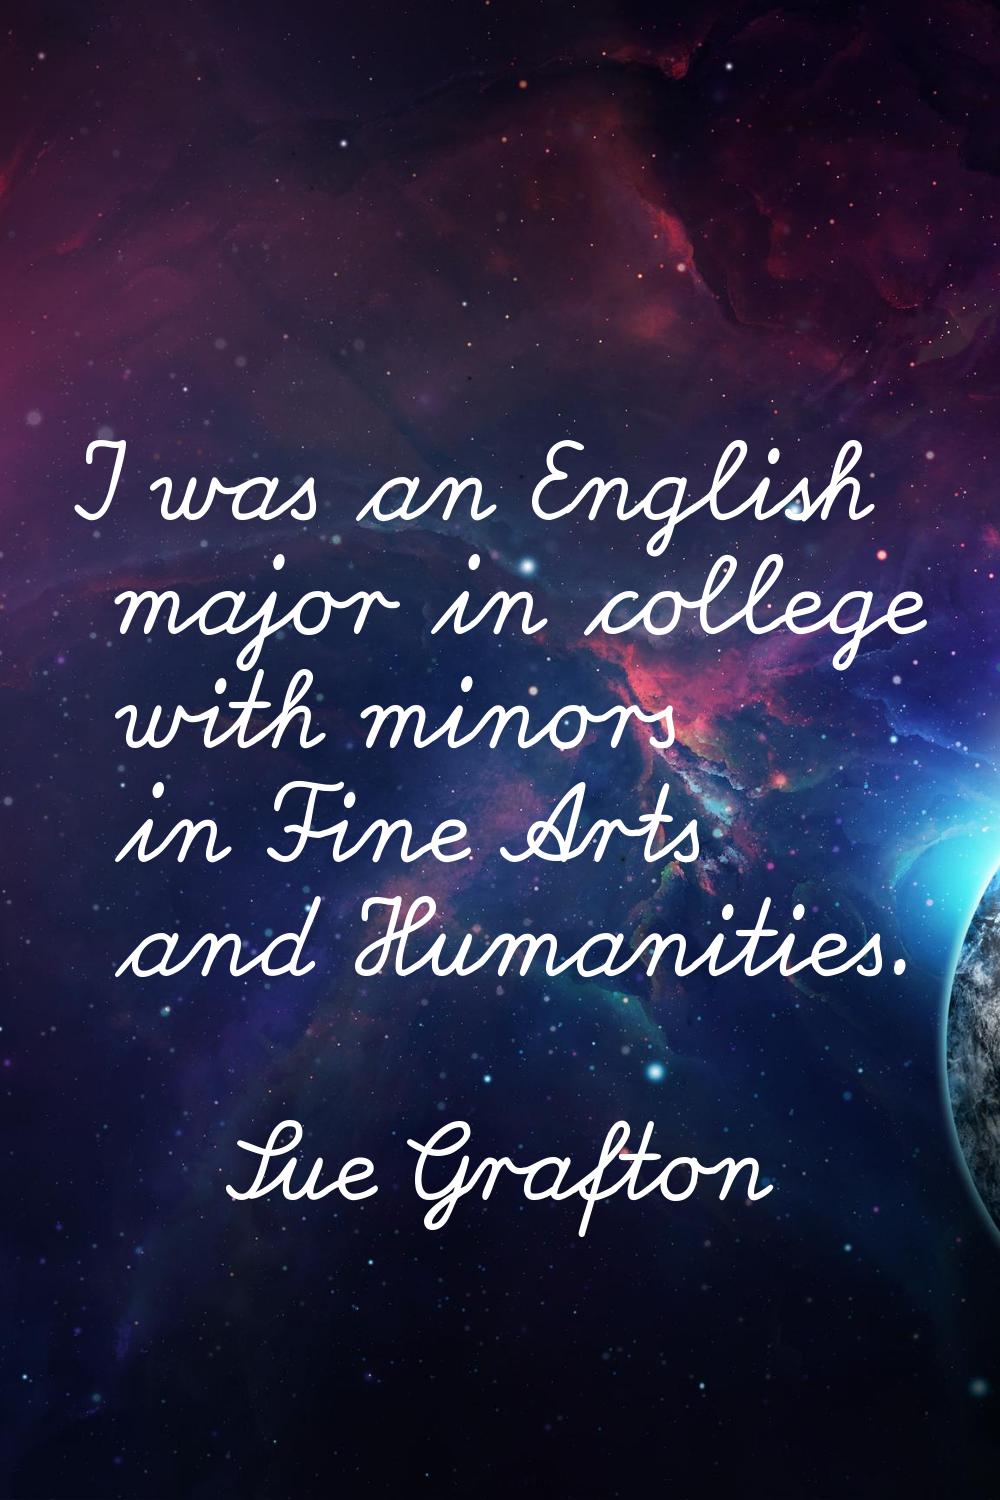 I was an English major in college with minors in Fine Arts and Humanities.